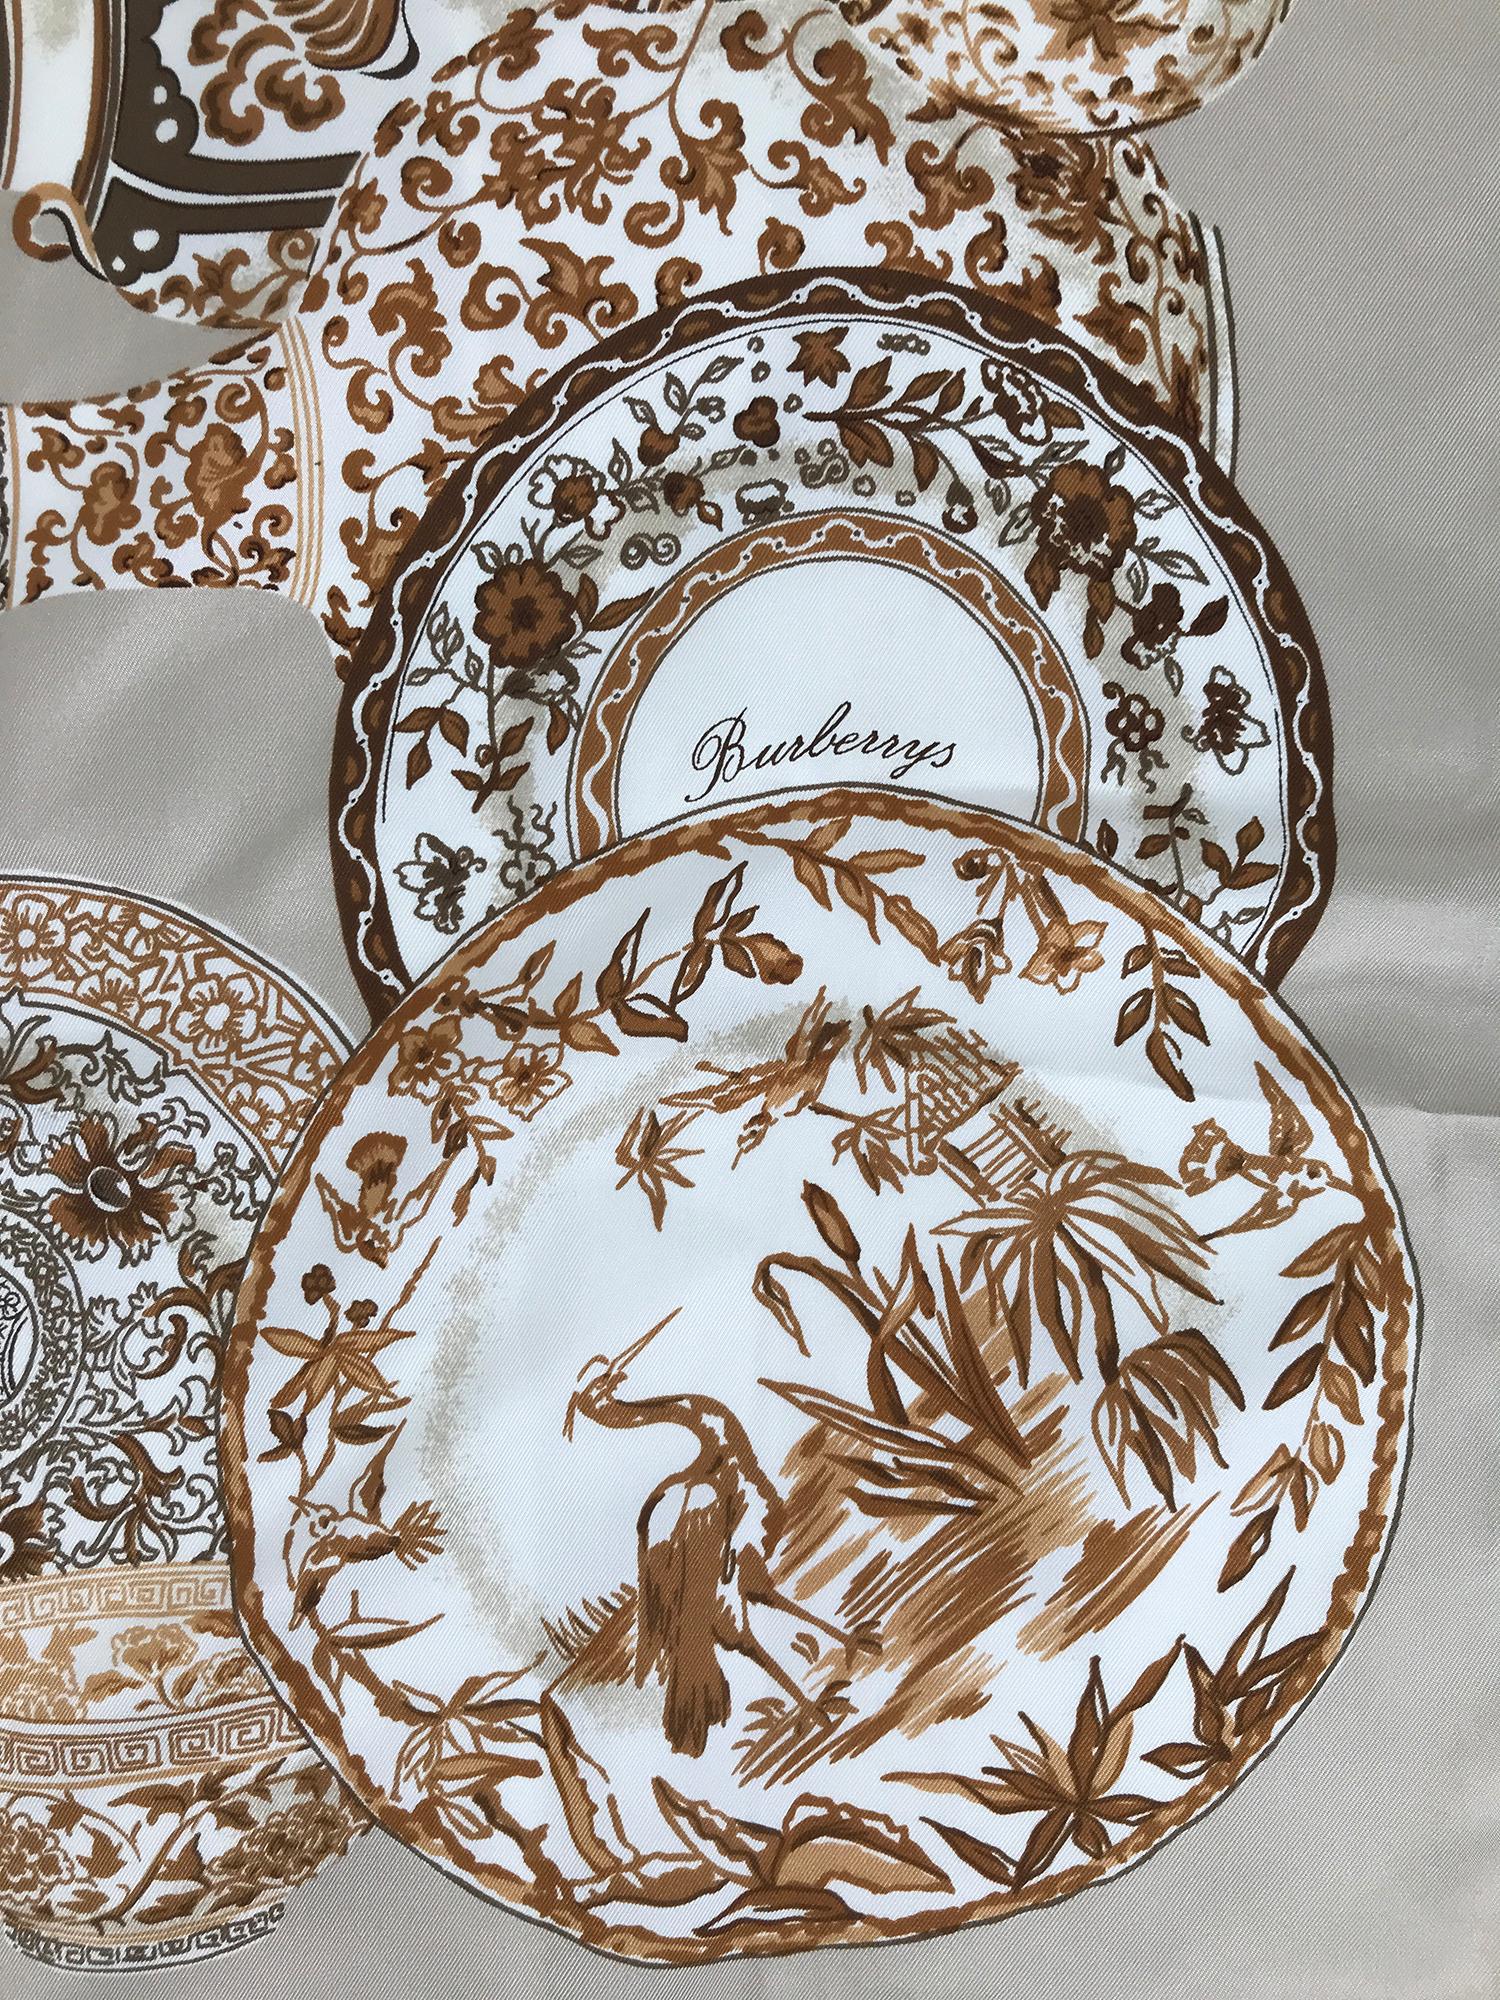 Burberry silk scarf the design is transfer-ware china pattern in browns and tans. This beautiful scarf has a deep border print of various plates and vases in Victorian transfer-ware designs. The print is signed. In excellent condition. 34